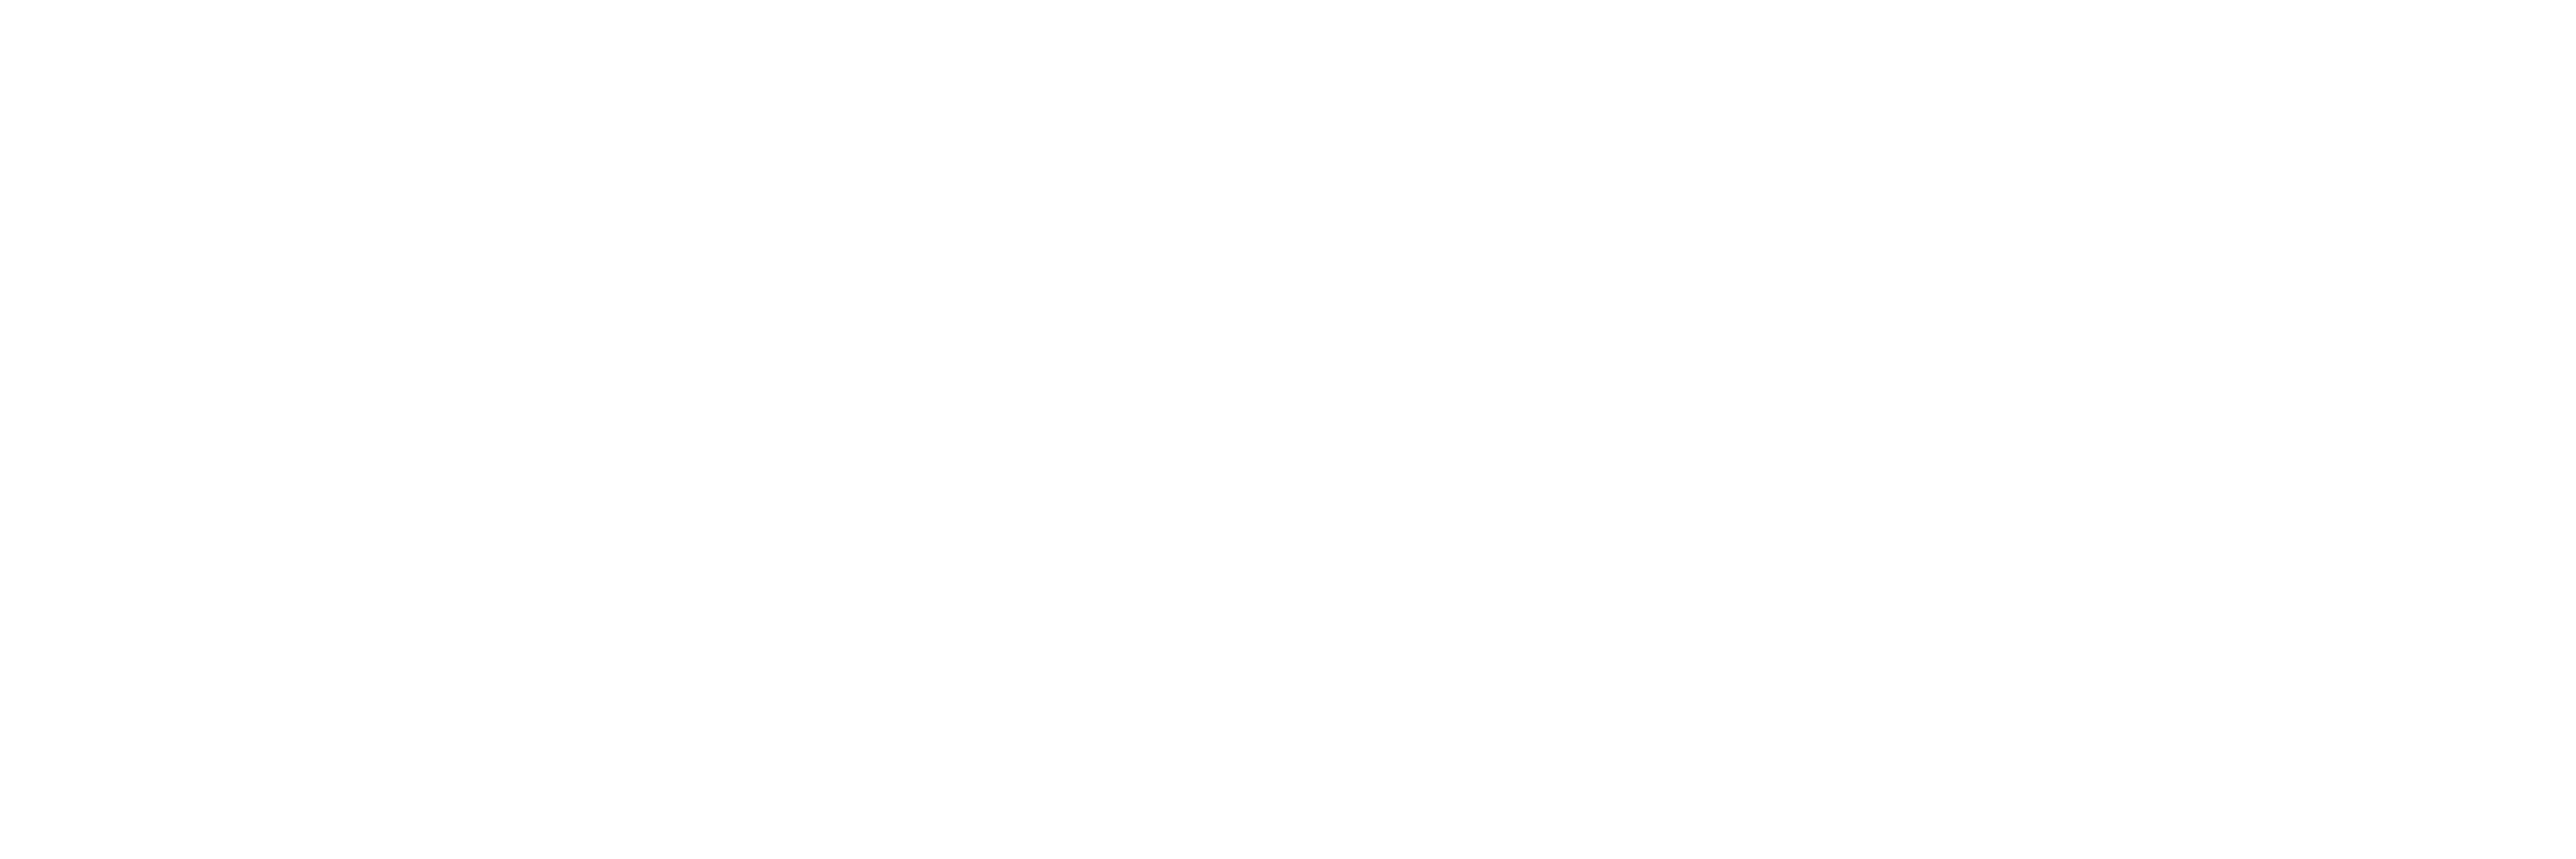 DressYourFace LIVE